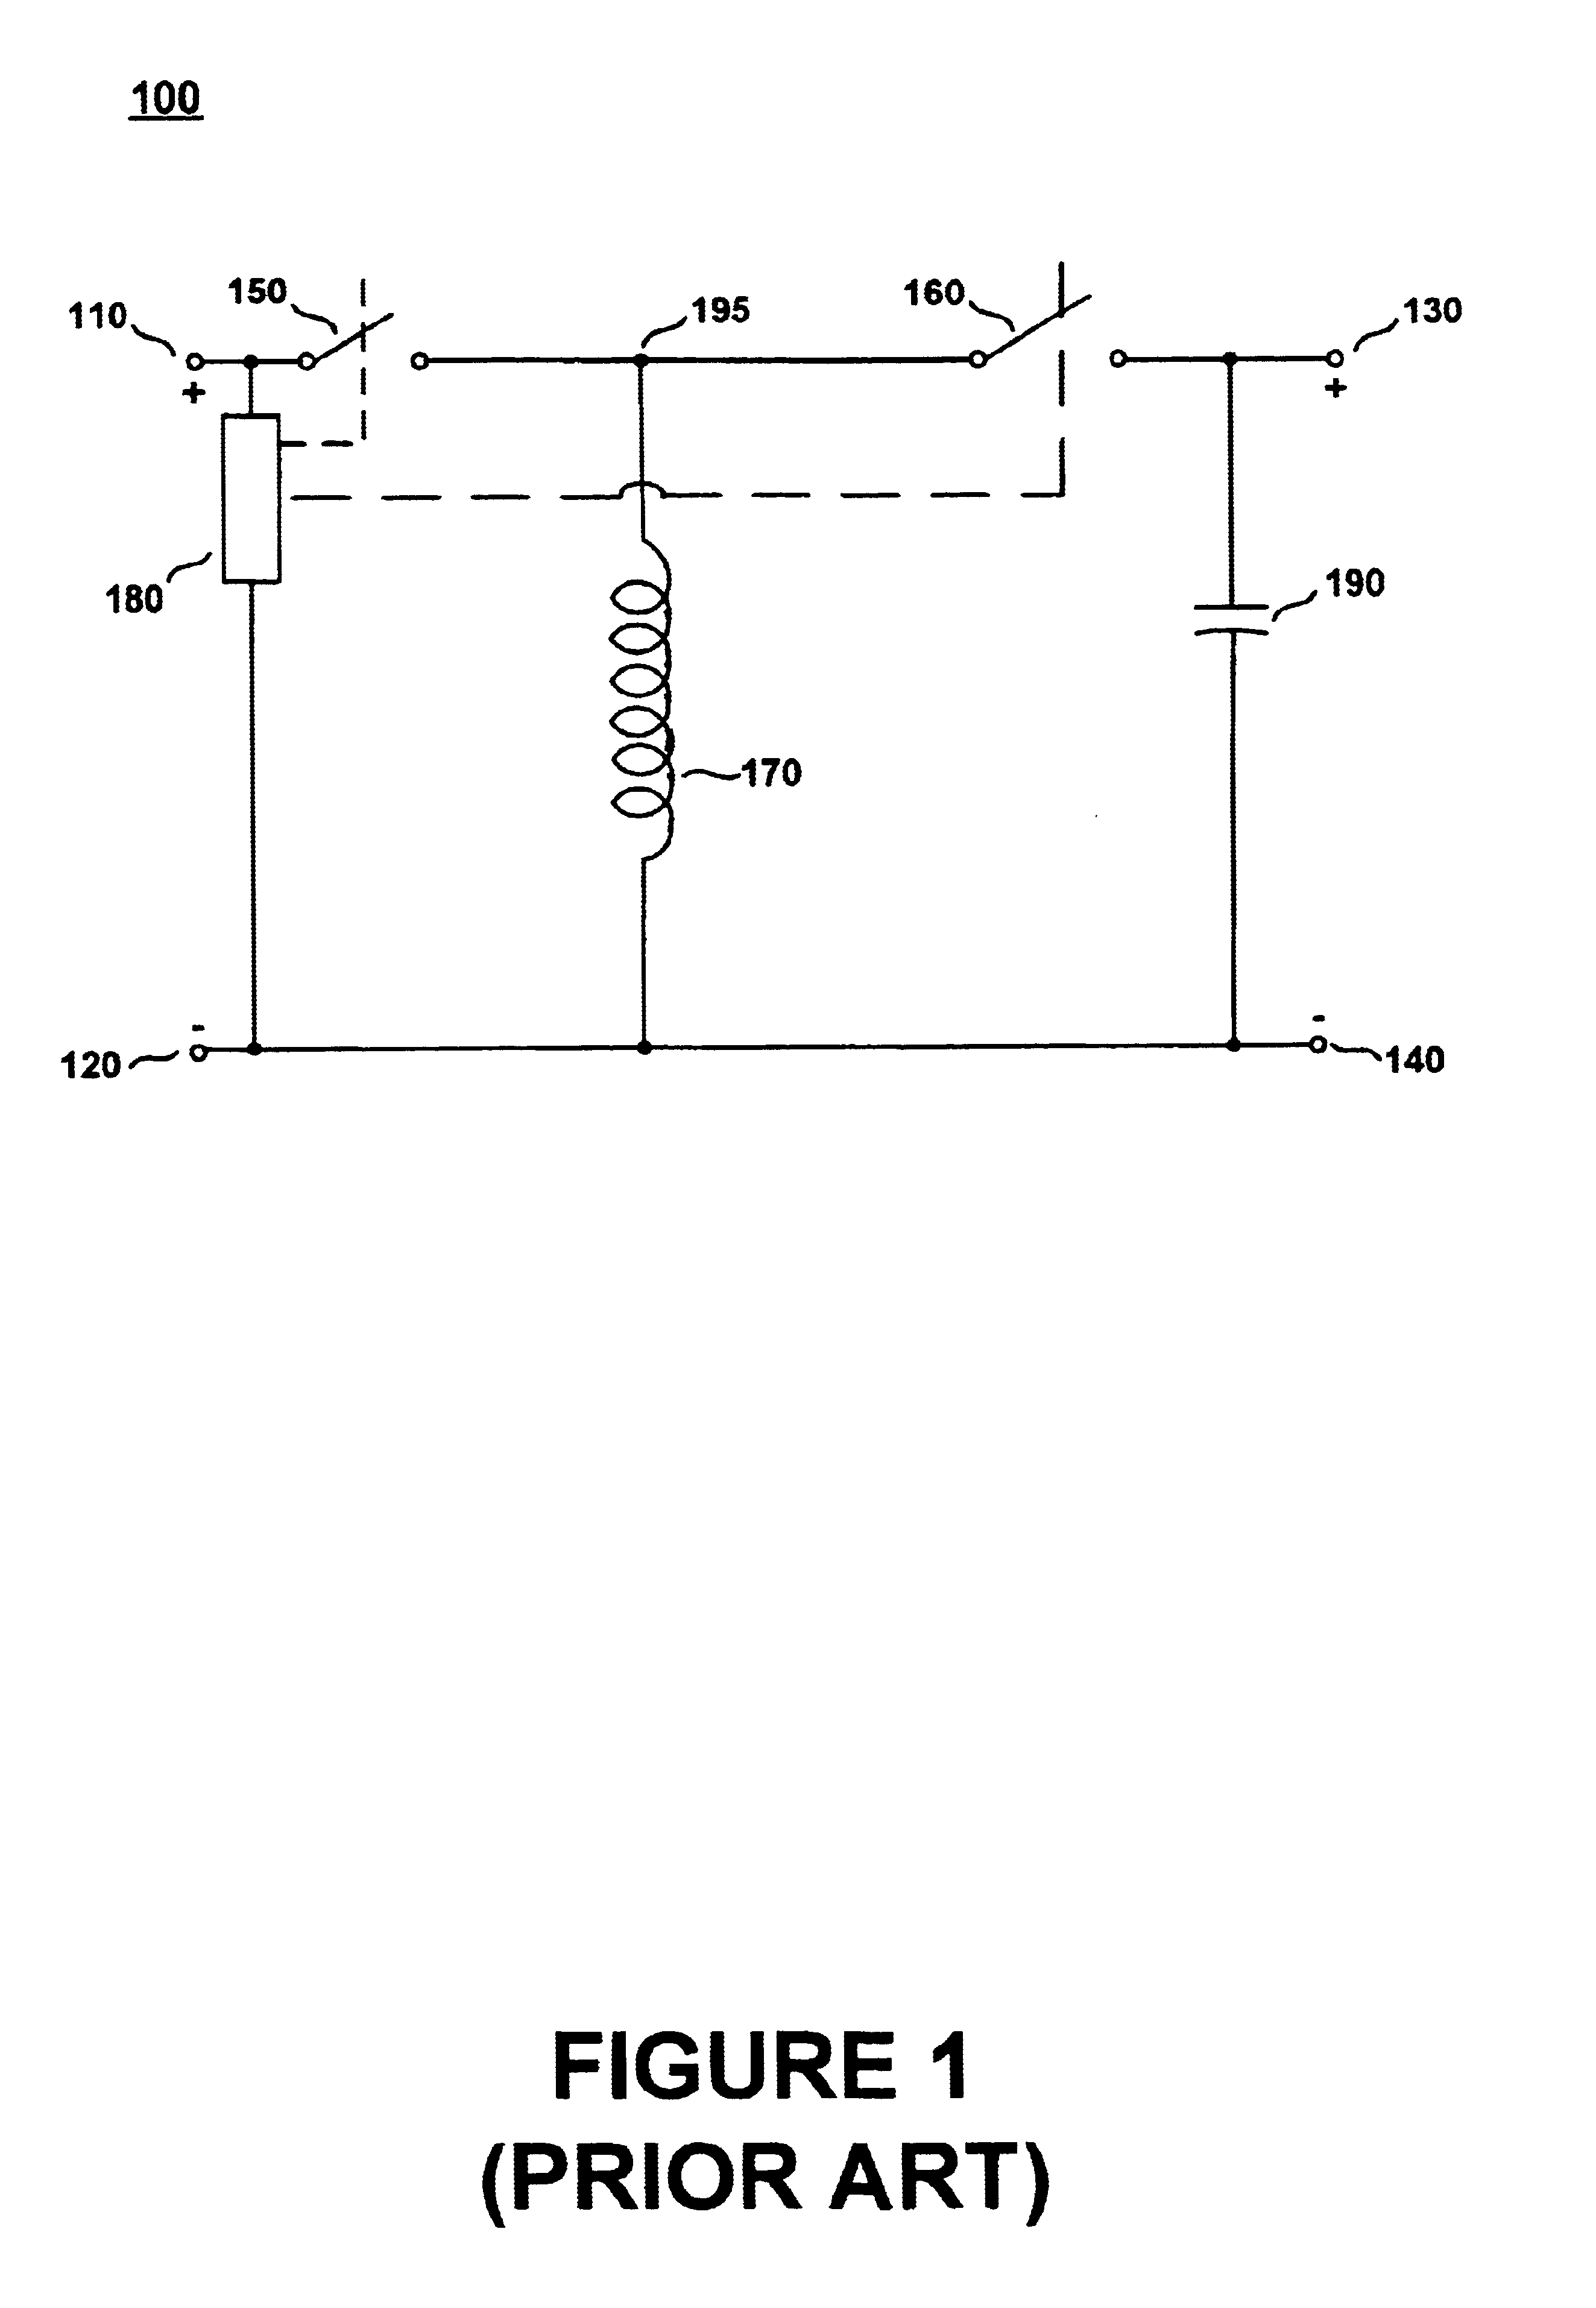 Buck-boost circuit with normally off JFET